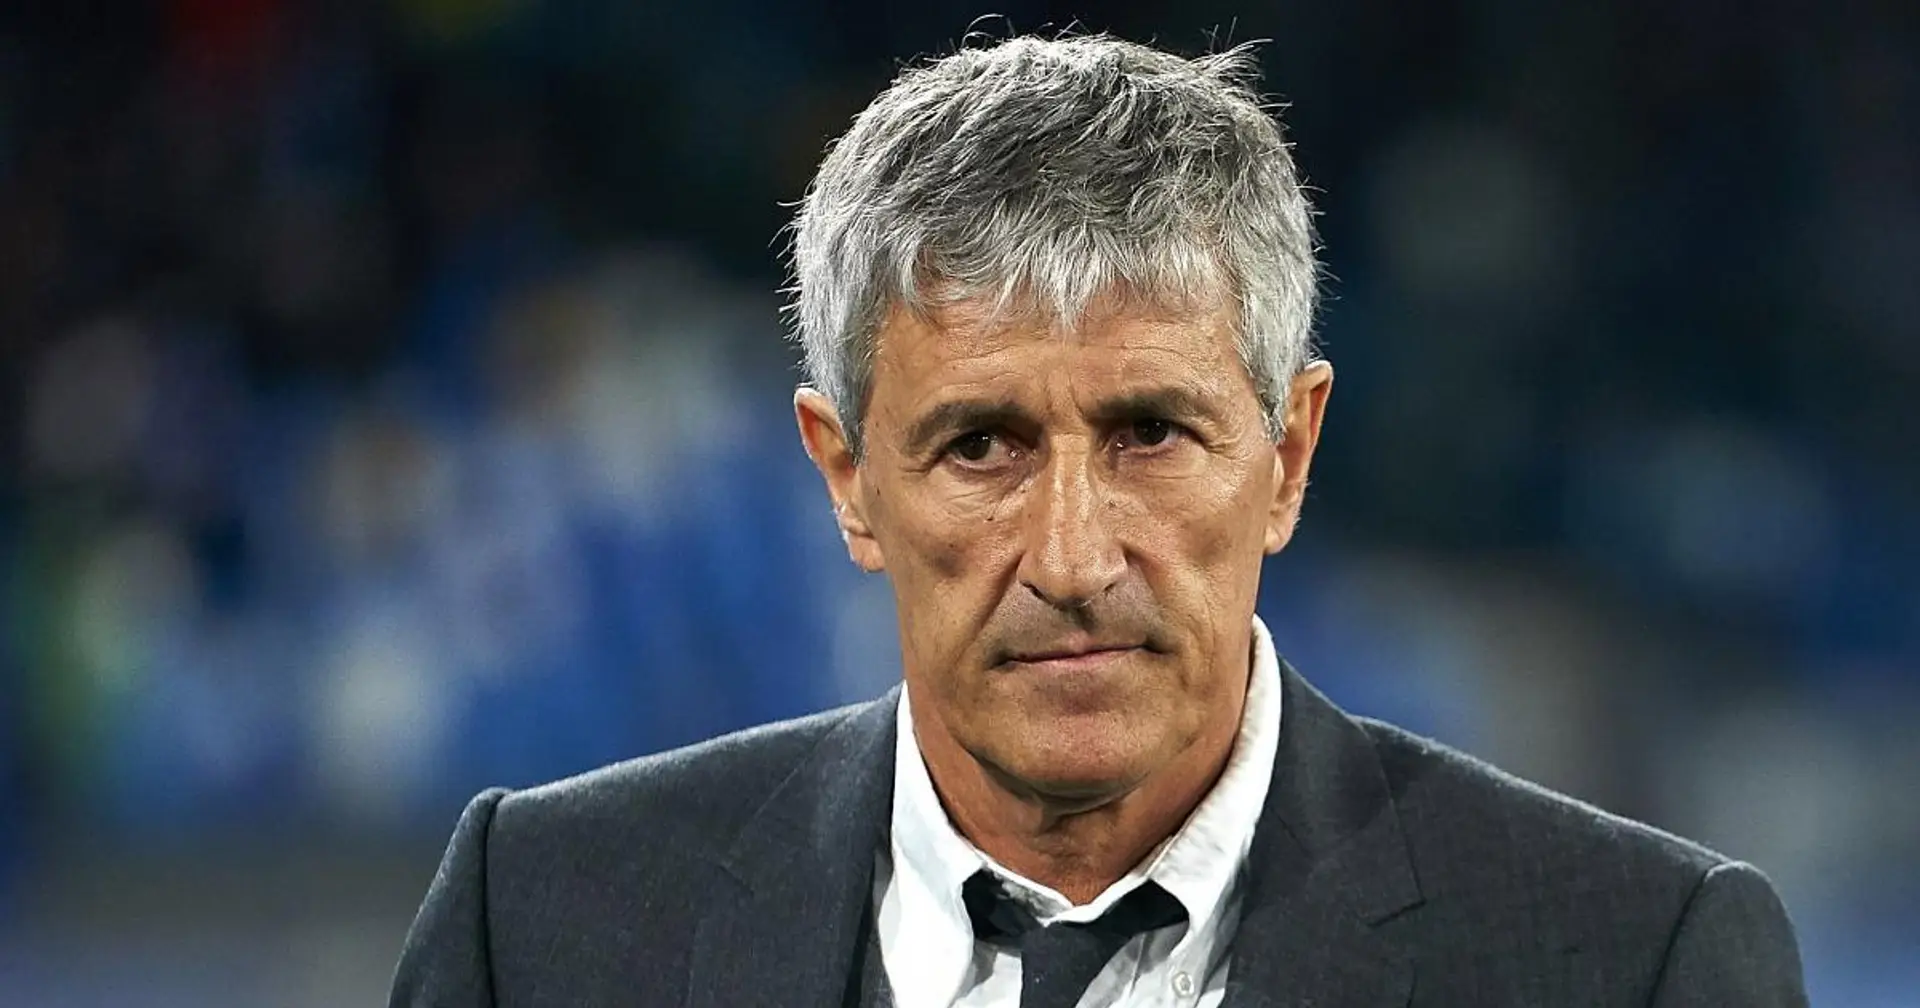 Setien believes it's 'nice to know' CL draw but focus remains on La Liga